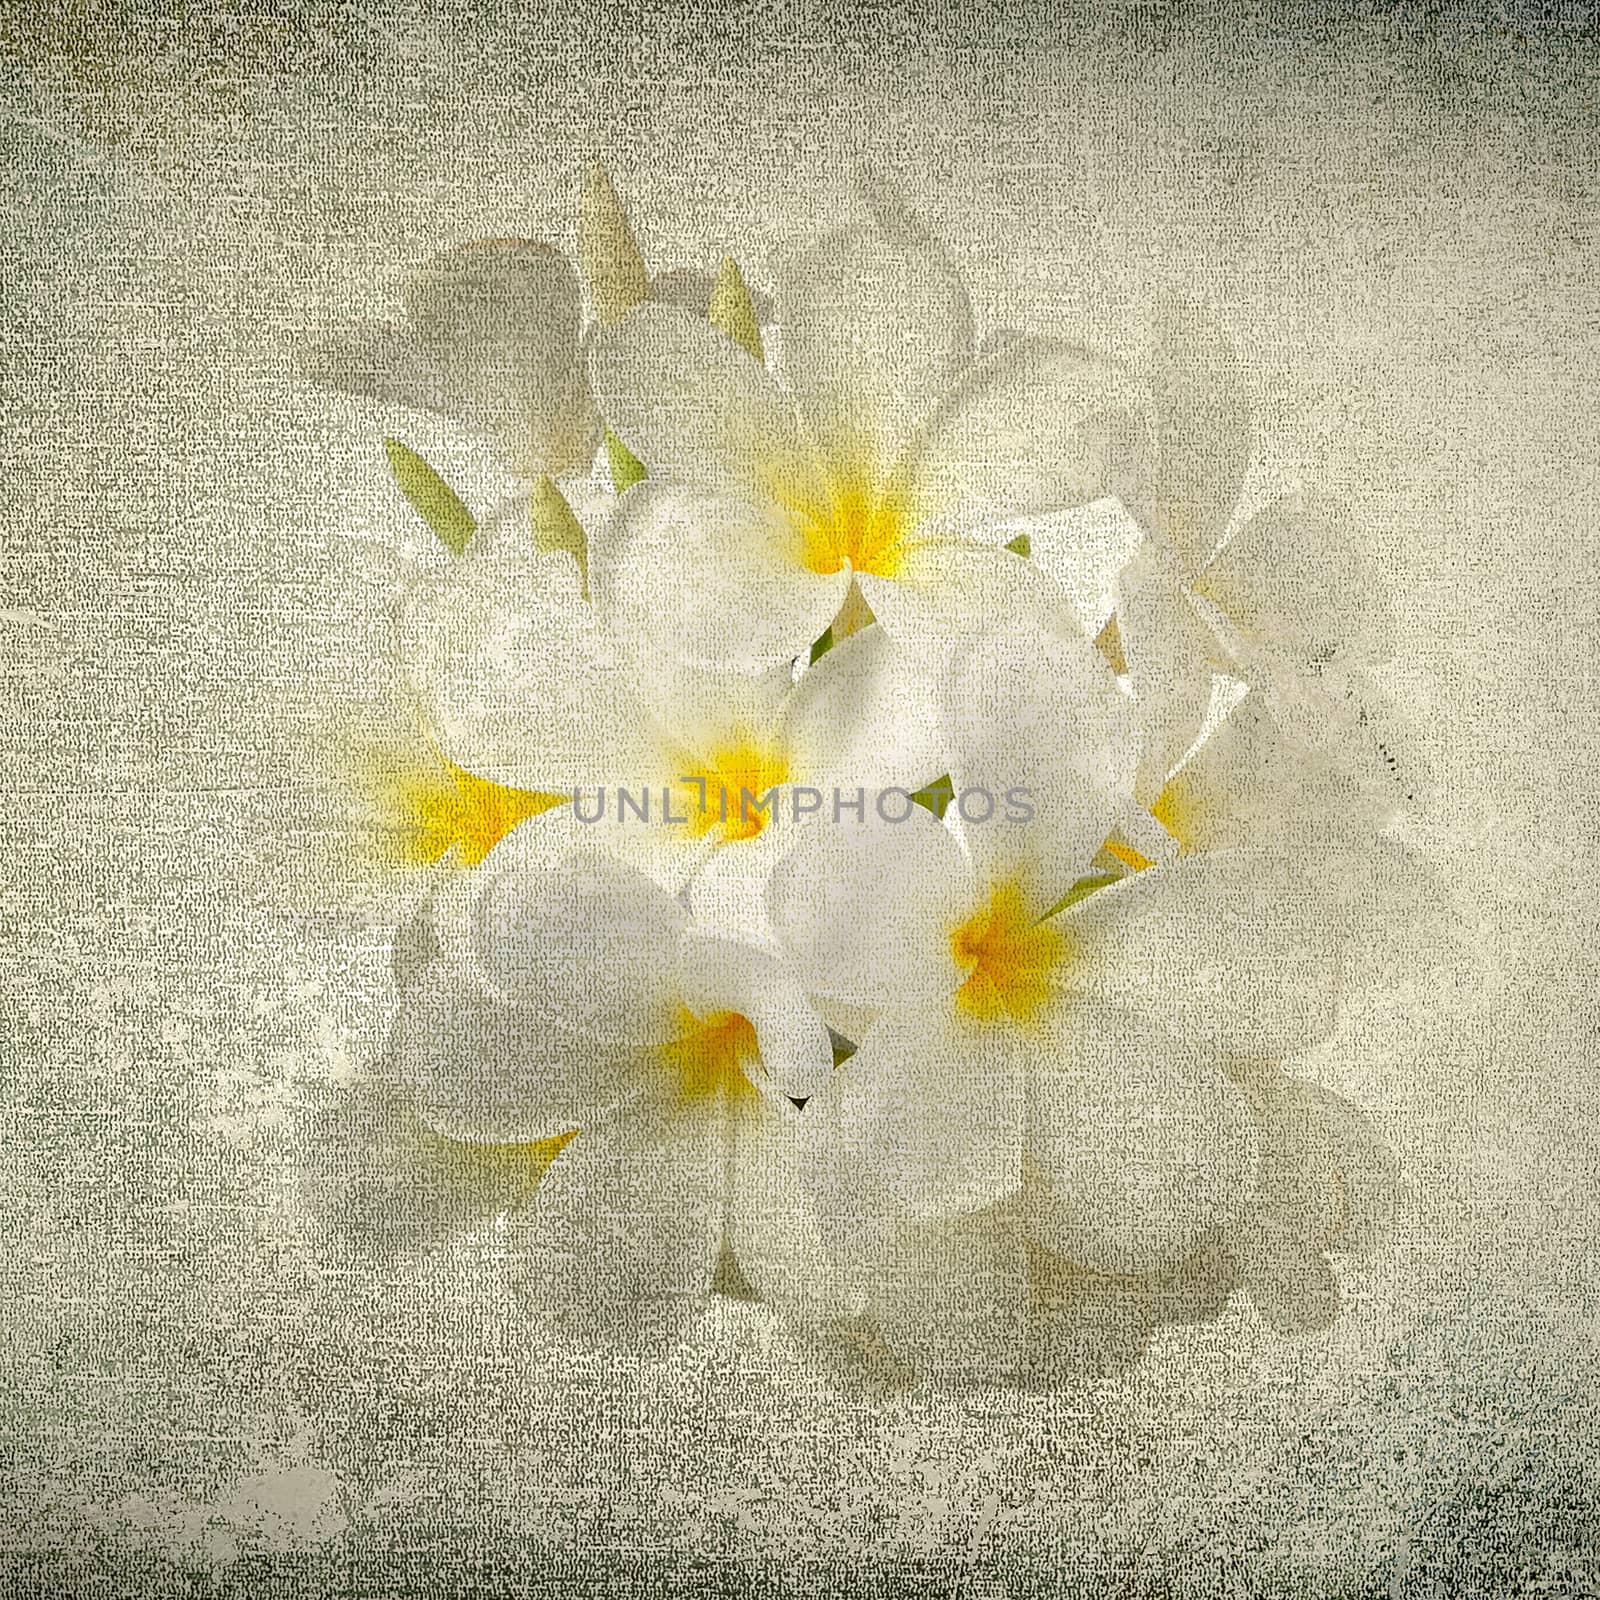 frangipani flower in the grunge paper  by sommai